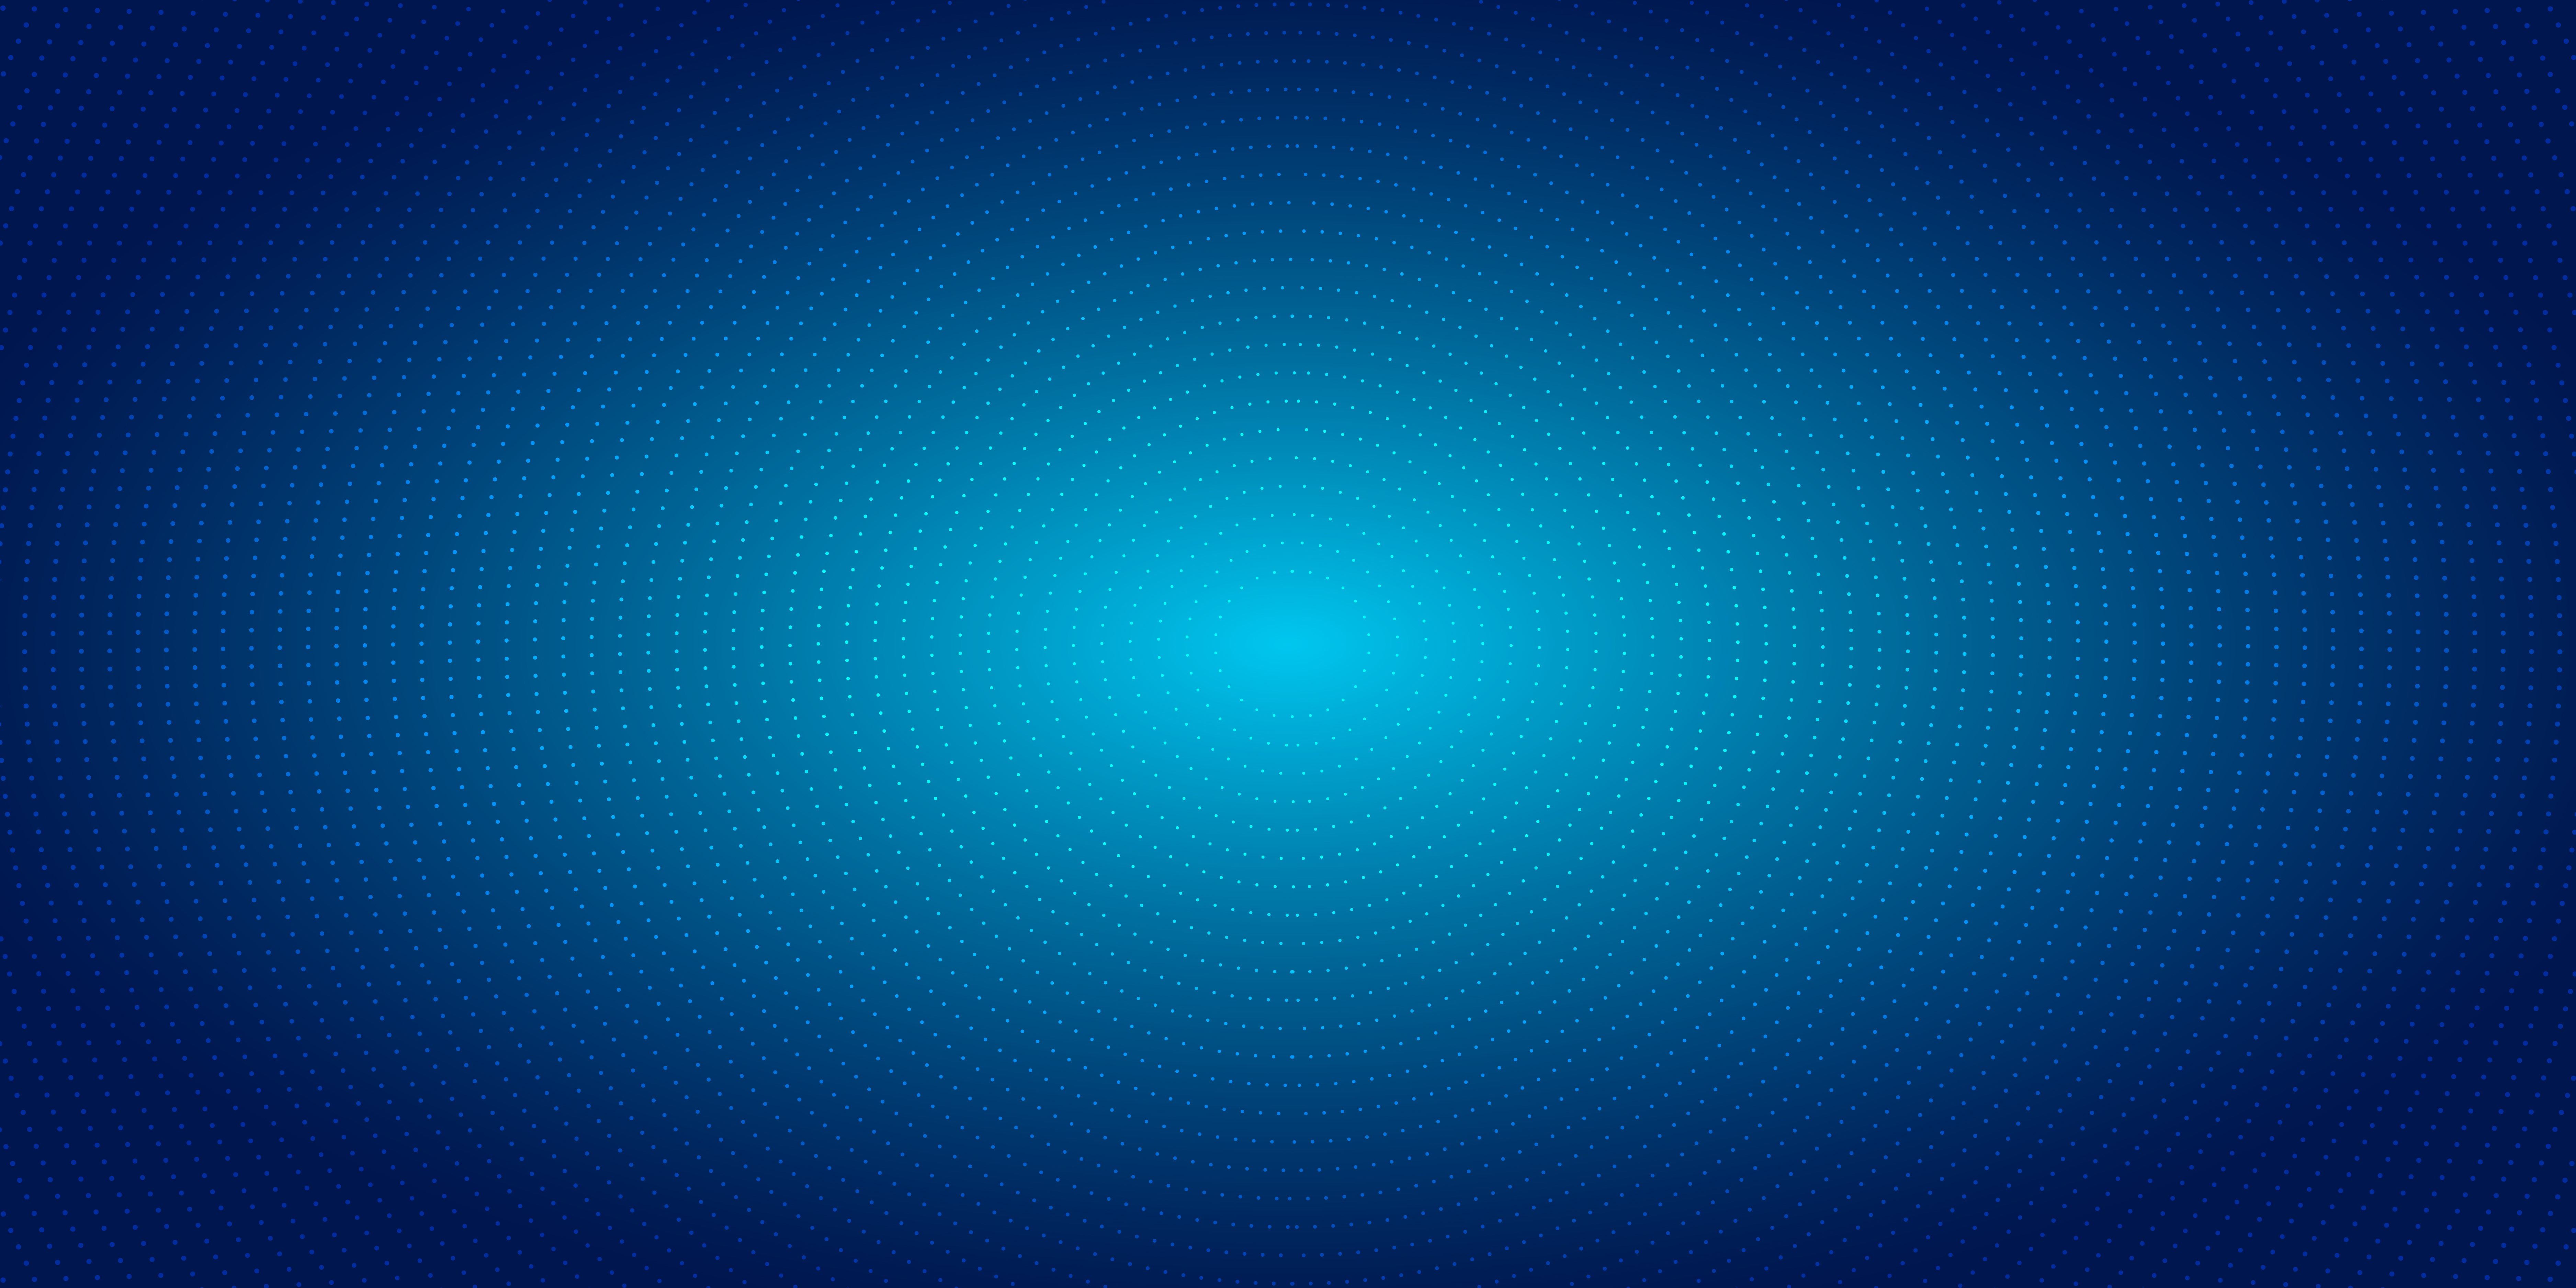 Light blue gradient background / blue radial gradient effect posters for  the wall • posters white, website, web | myloview.com